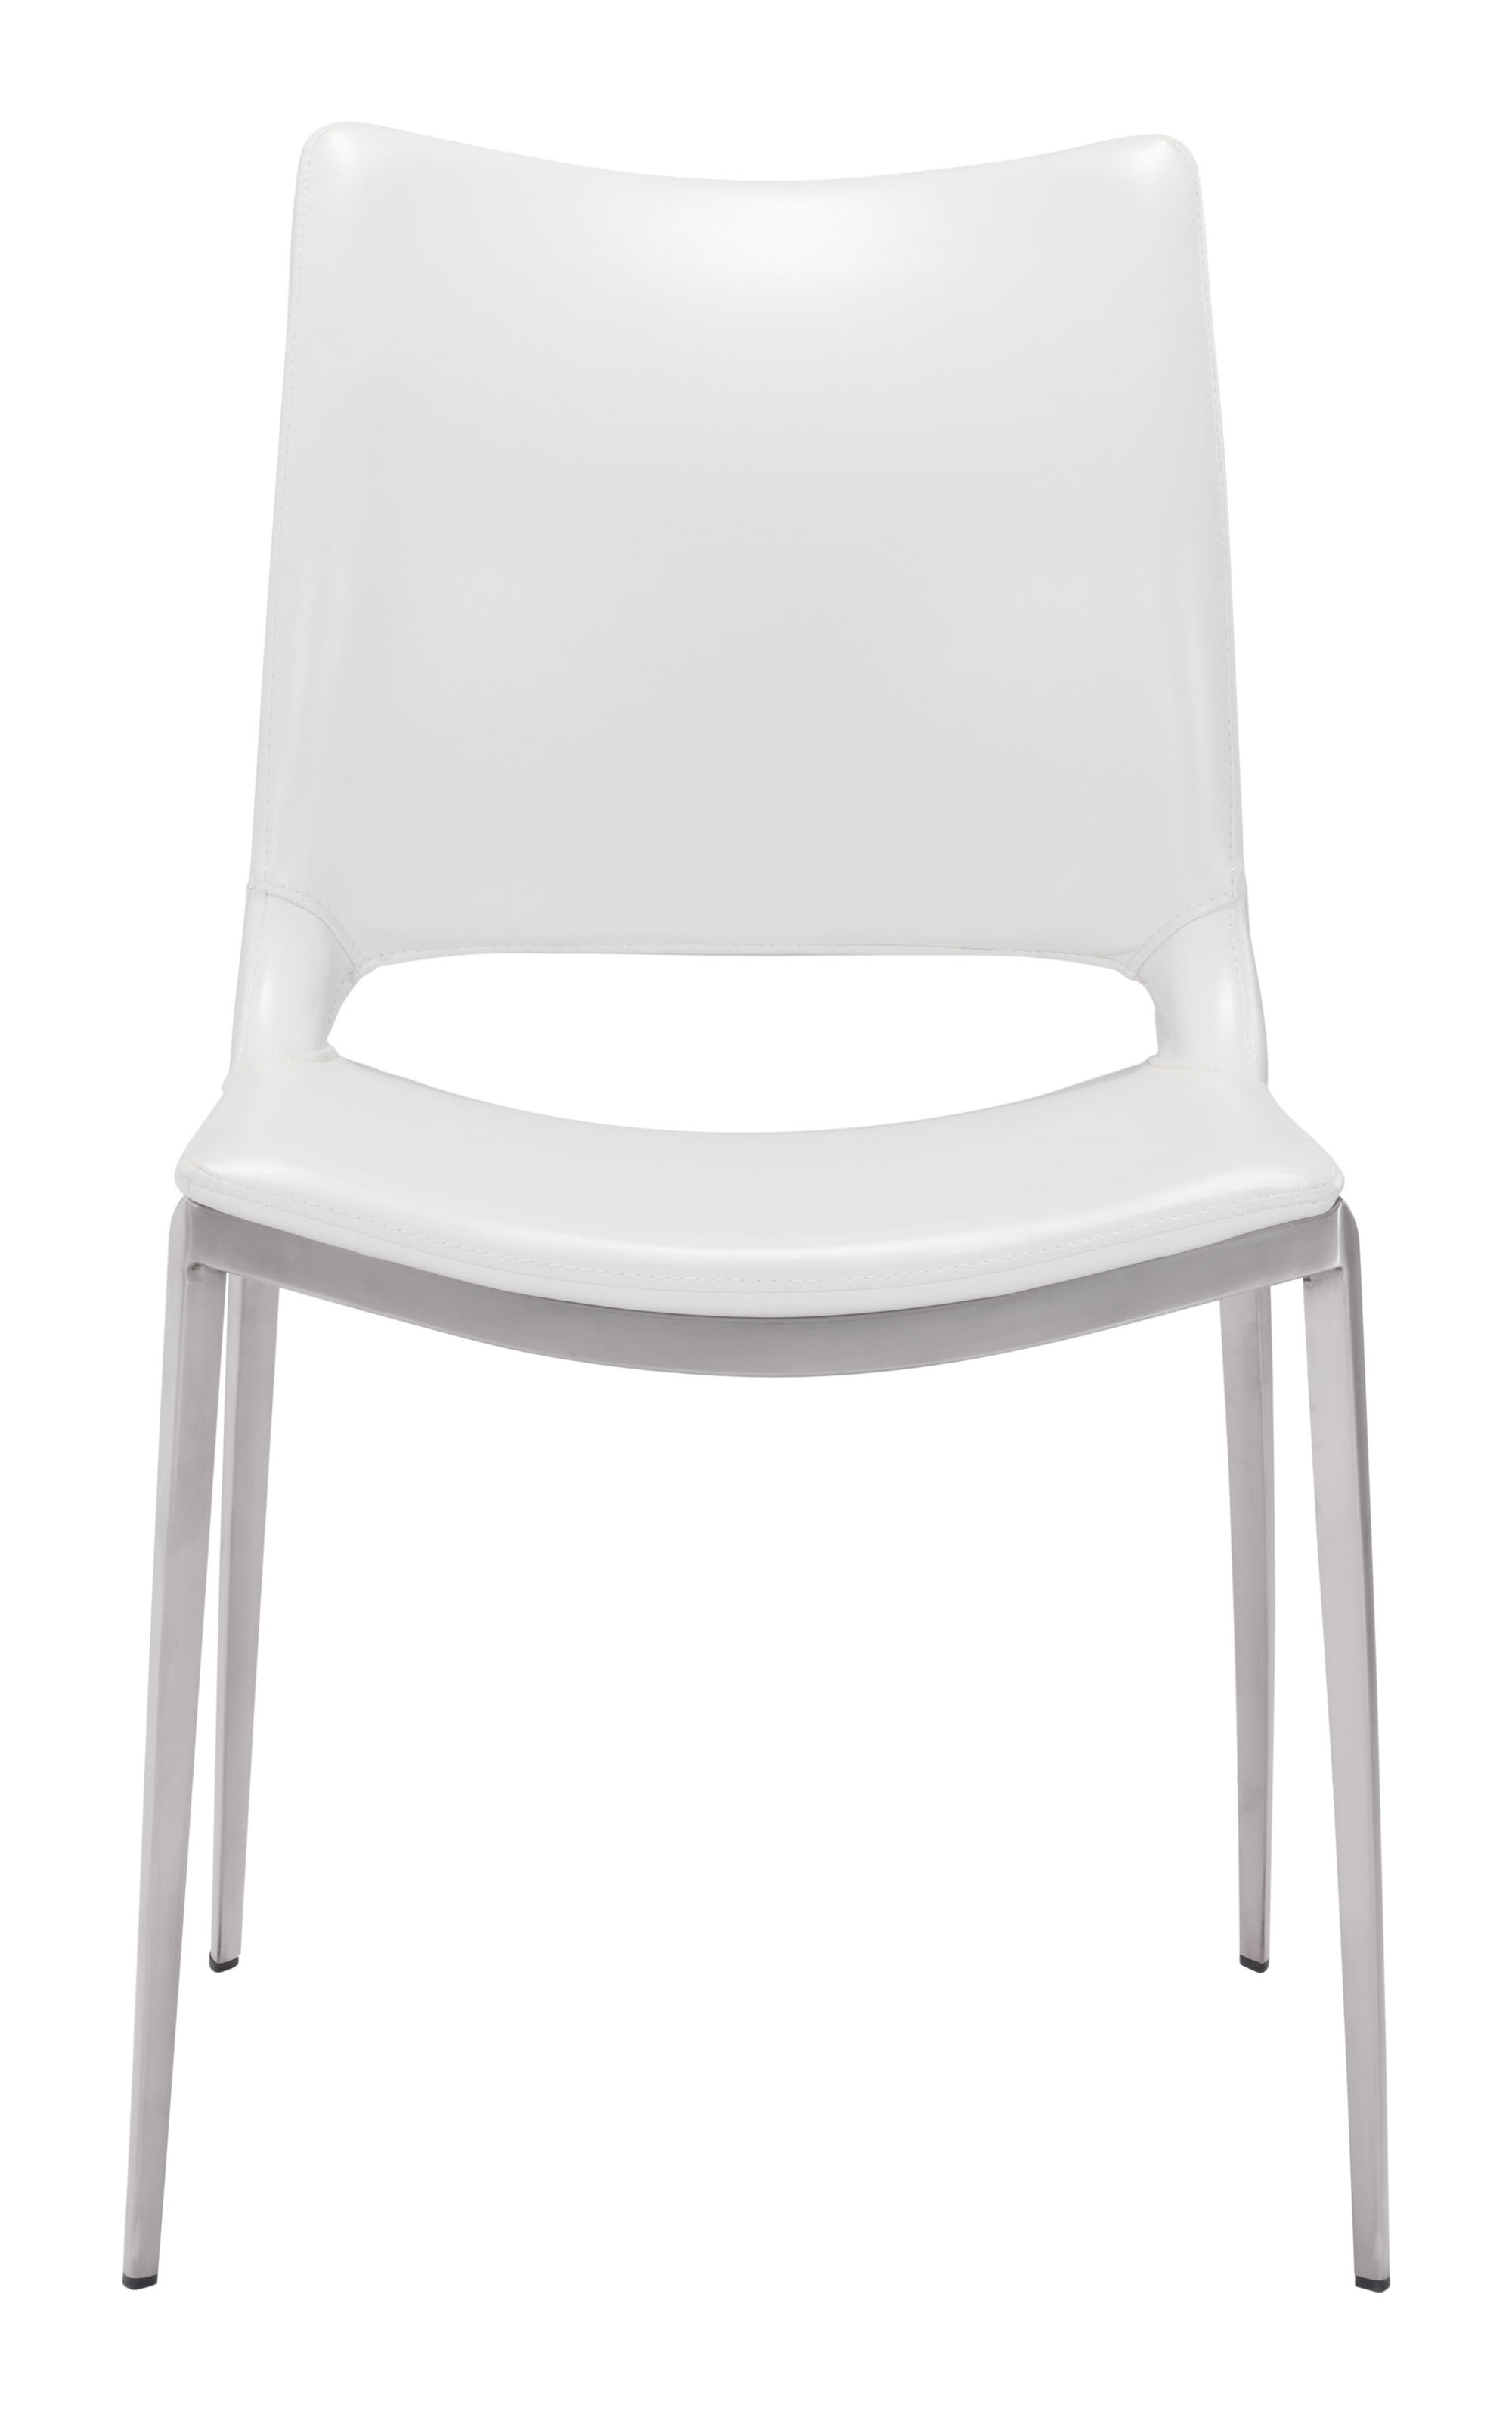 Stich Design White Faux Leather and Walnut Side or Dining Chairs Set of 2